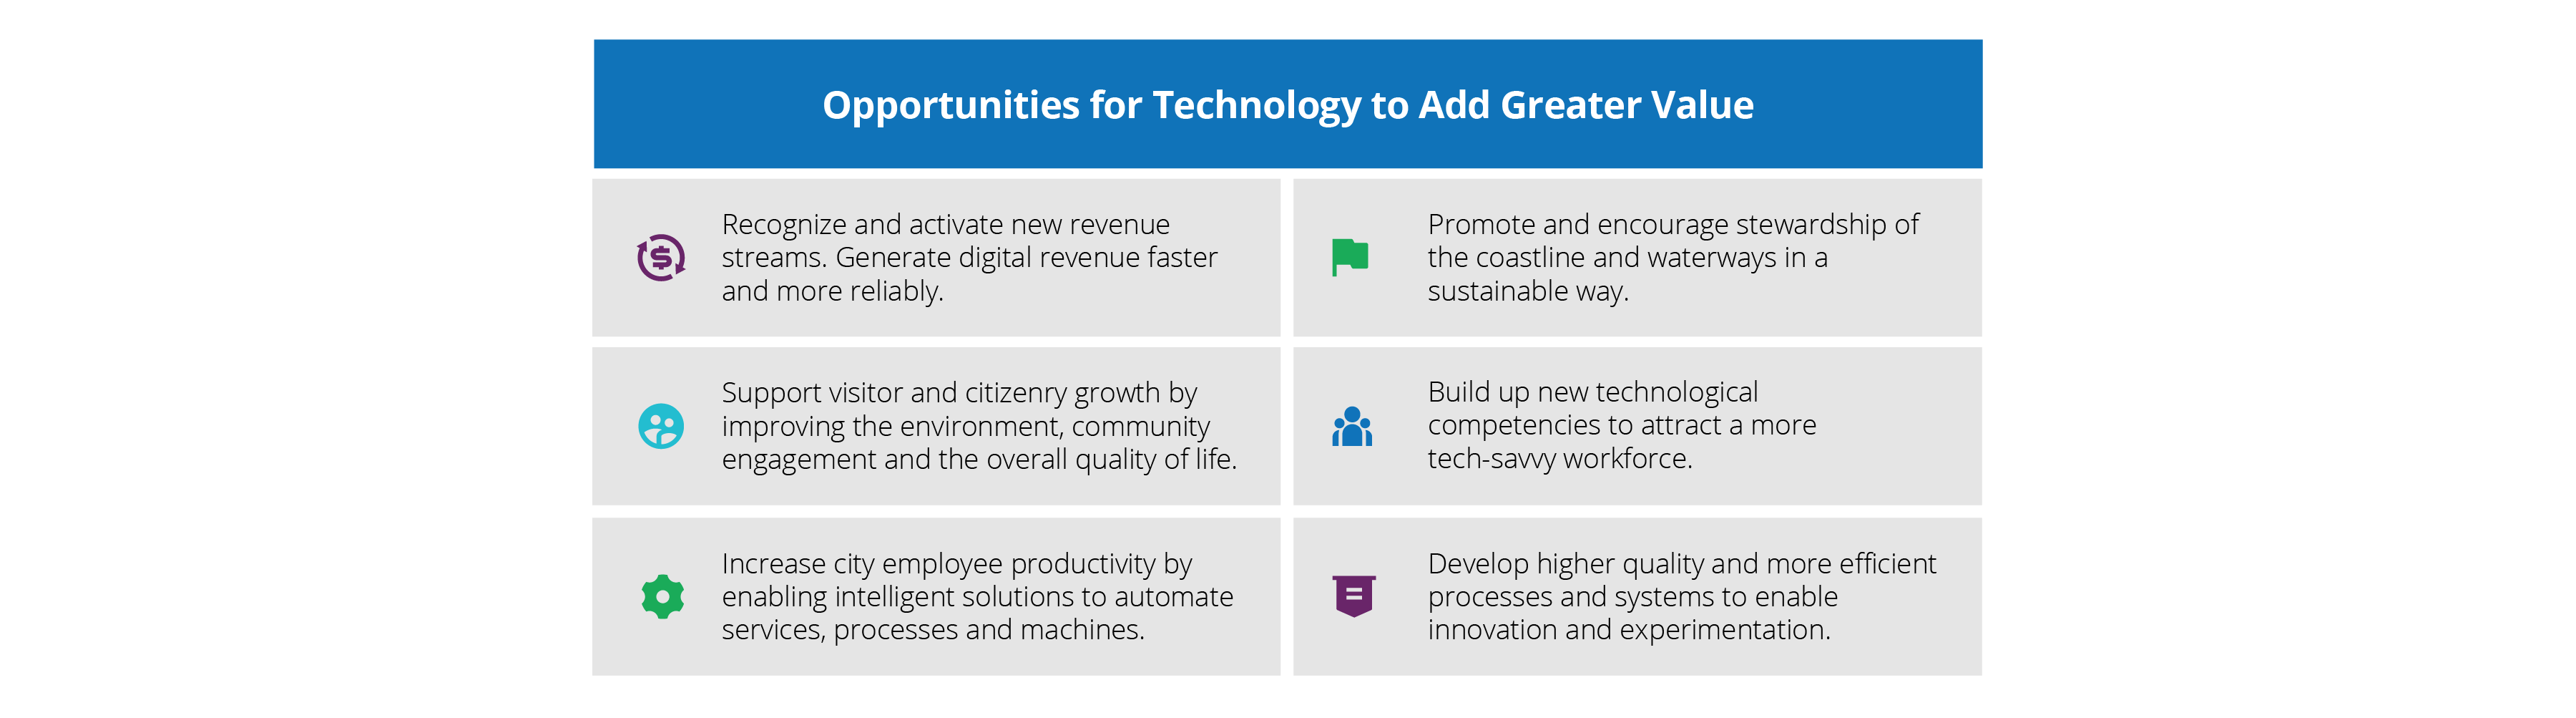 Opportunities for tech to add greater value